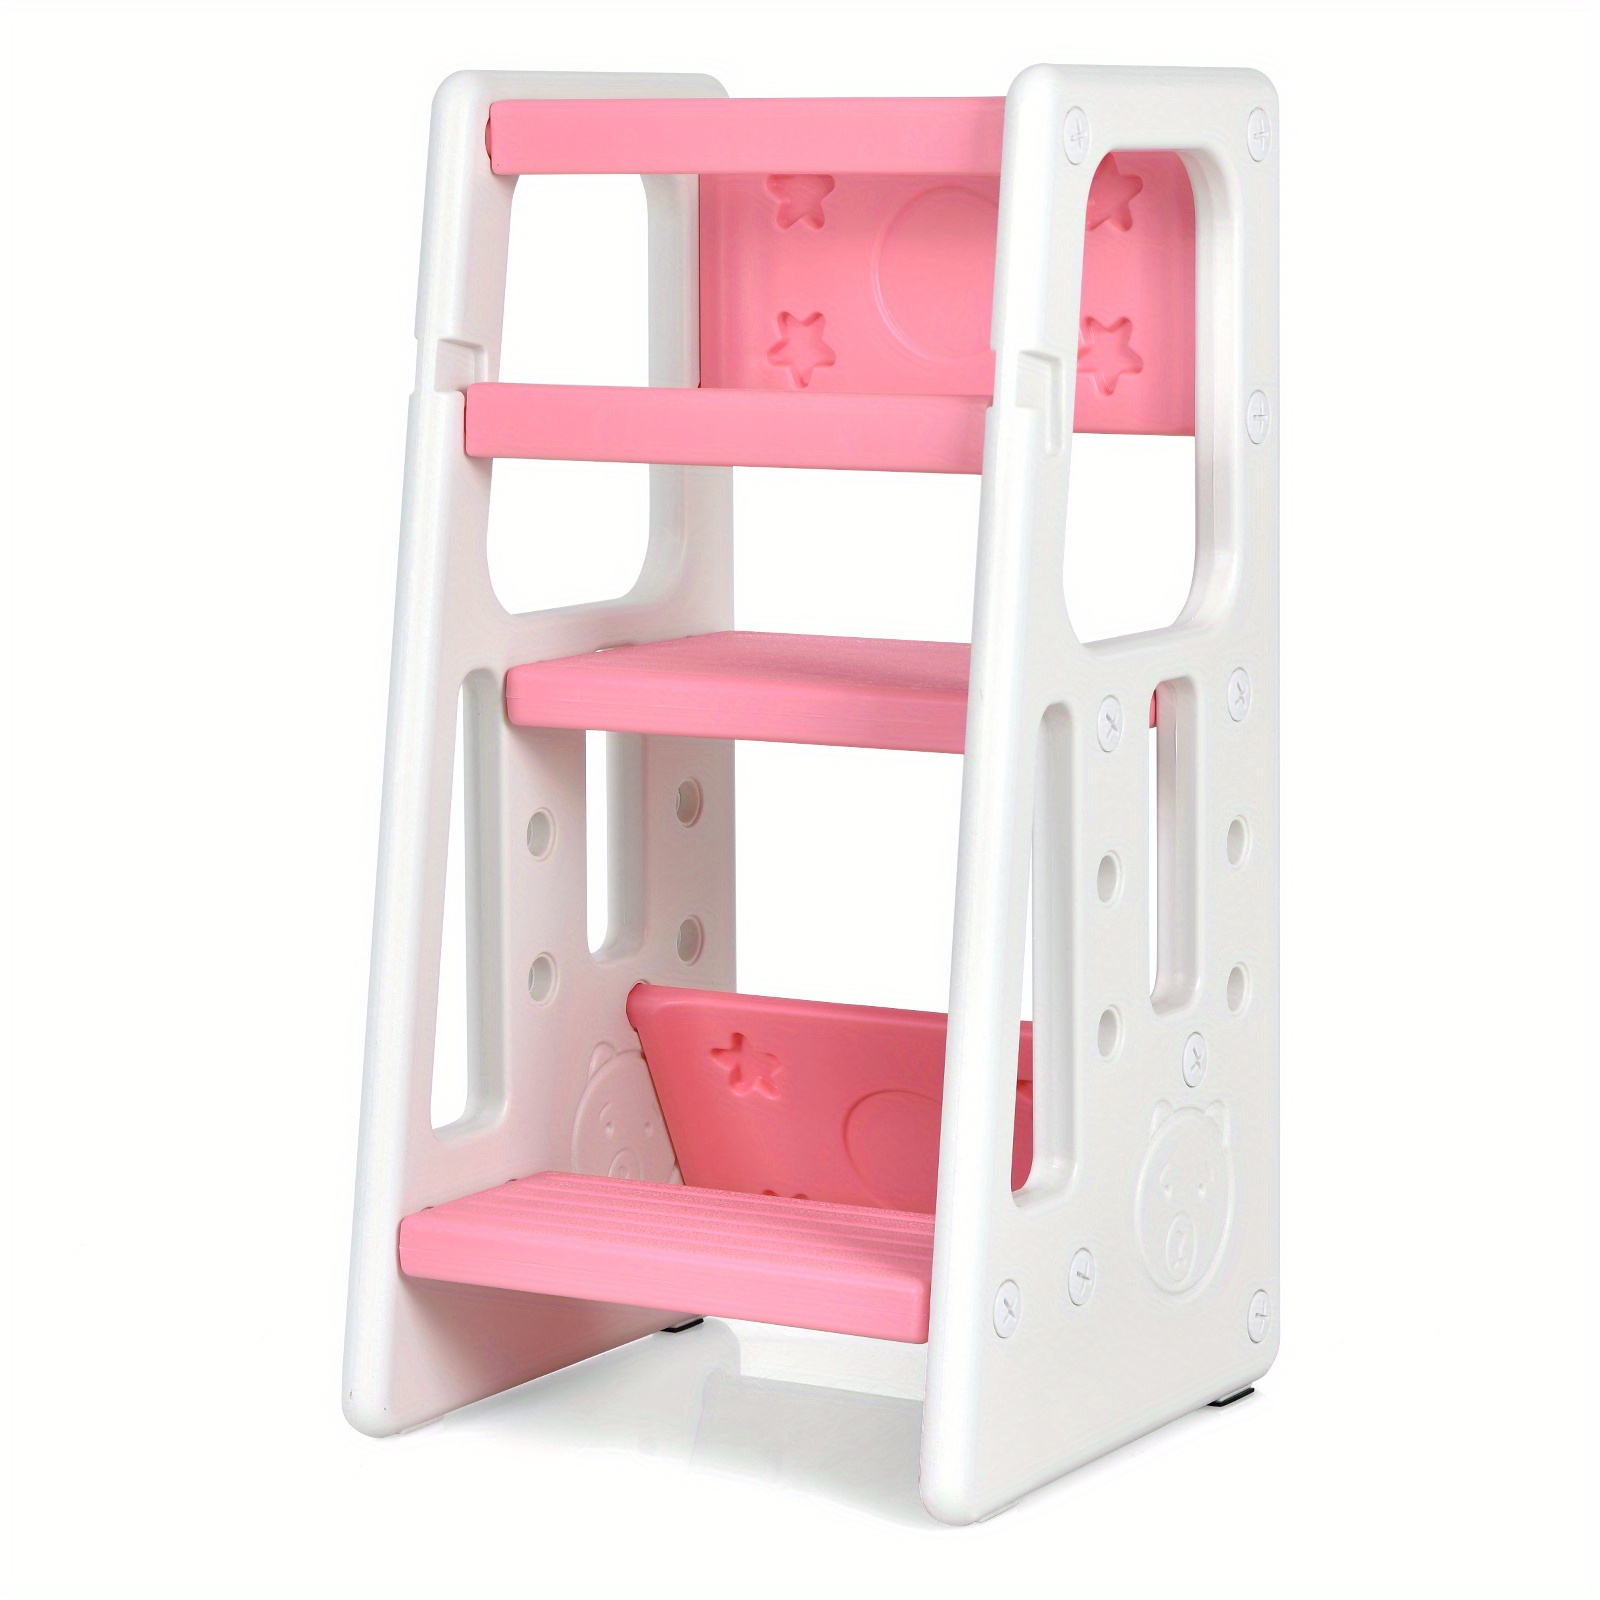 

Lifezeal Kids Kitchen Step Stool With Rails Toddler Learning Stool Pink